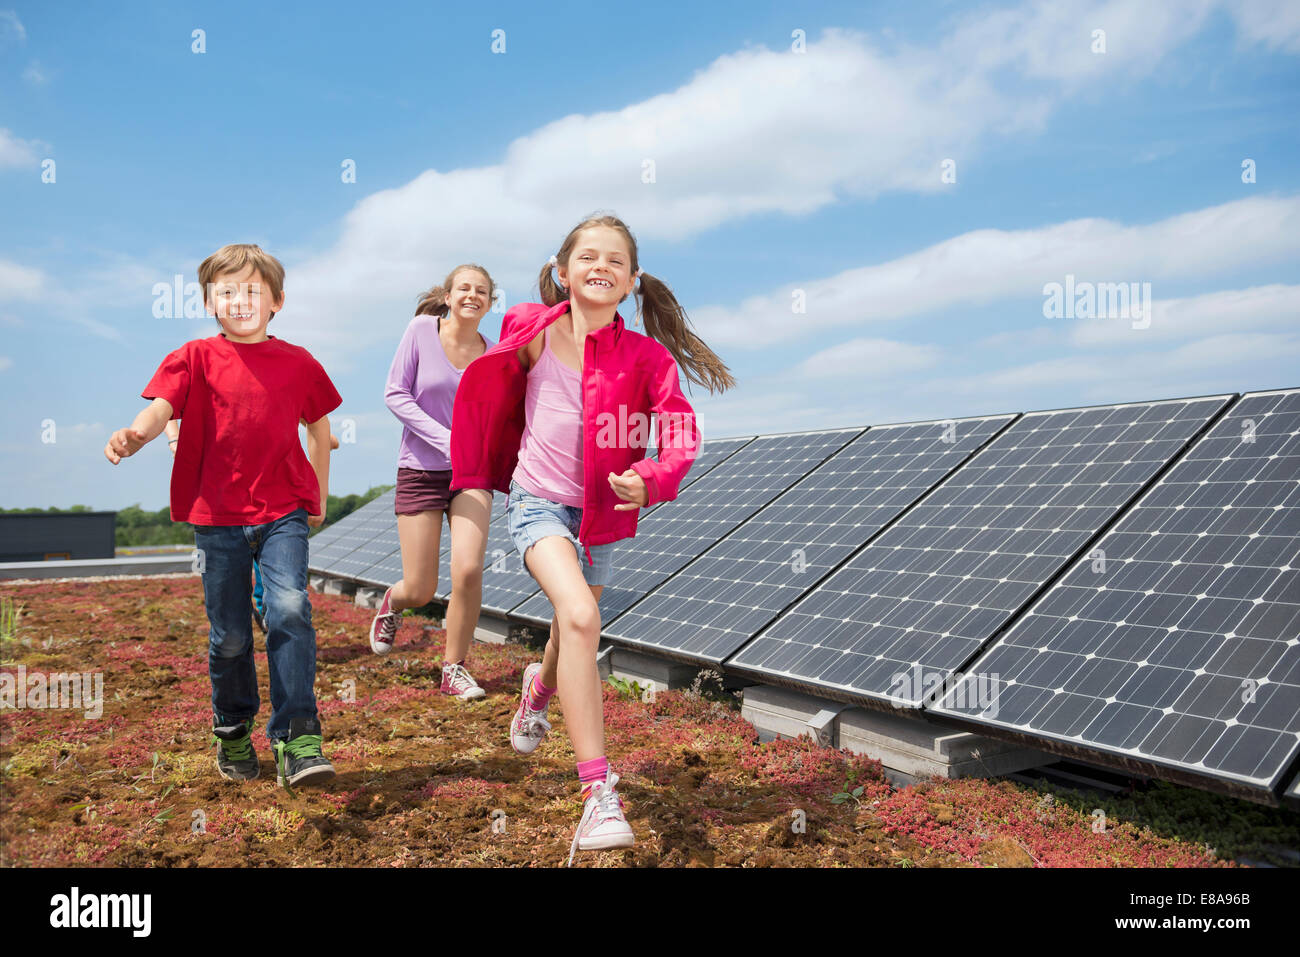 Brother sisters running sport solar energy Stock Photo